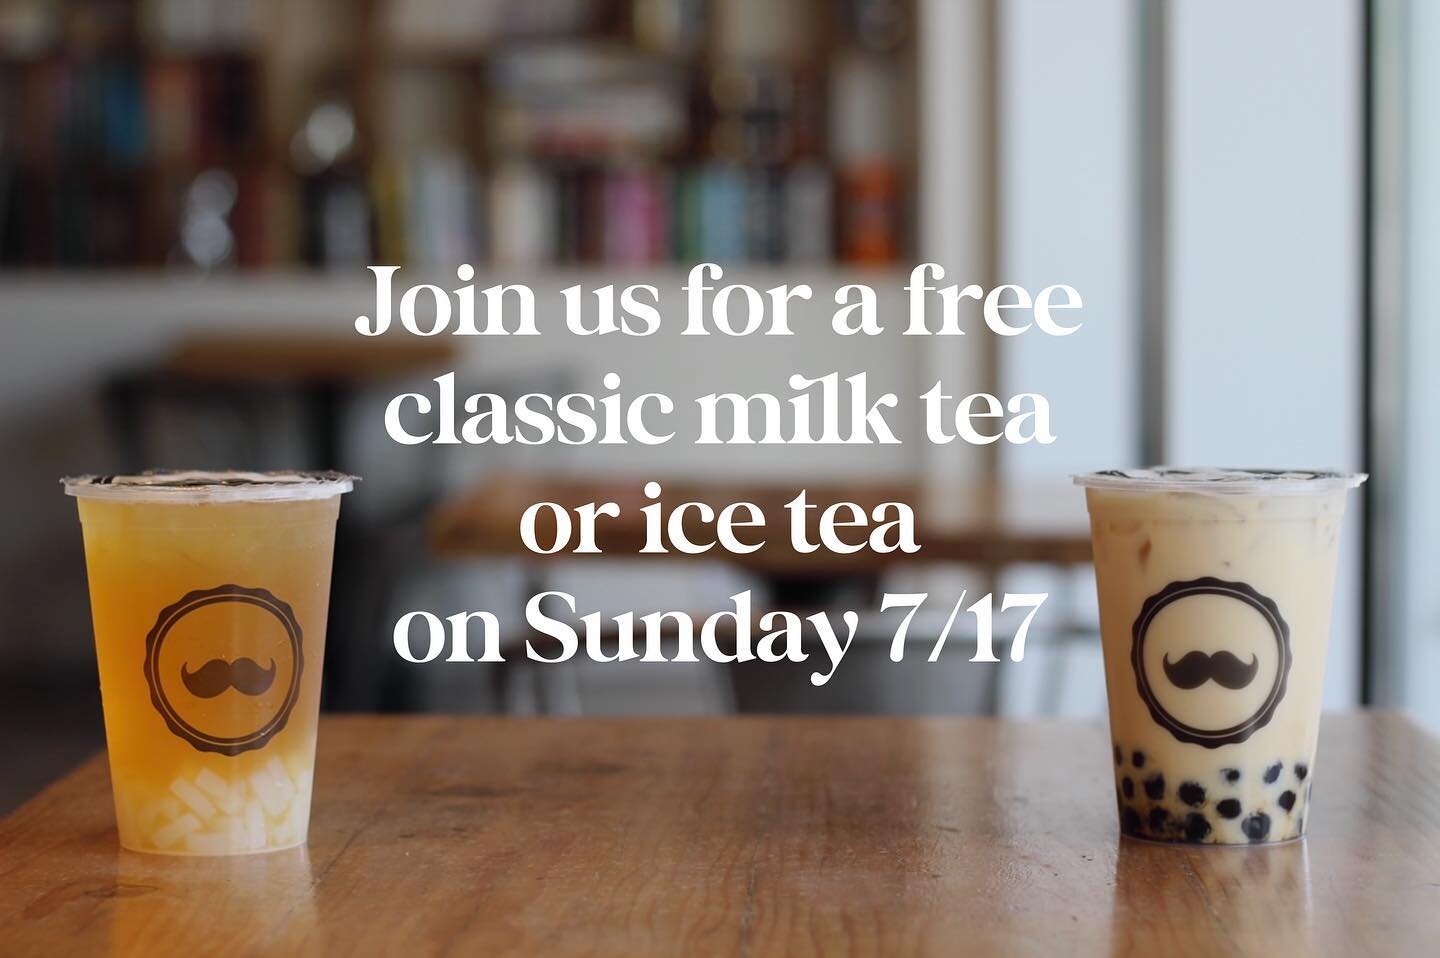 Join us this Sunday, July 17 for free drinks to celebrate our sister store @mrteacafe &lsquo;s anniversary of 8 years! Thank you for all your support! Please like and share this photo with your friends!
*One drink per person, limited to any regular s